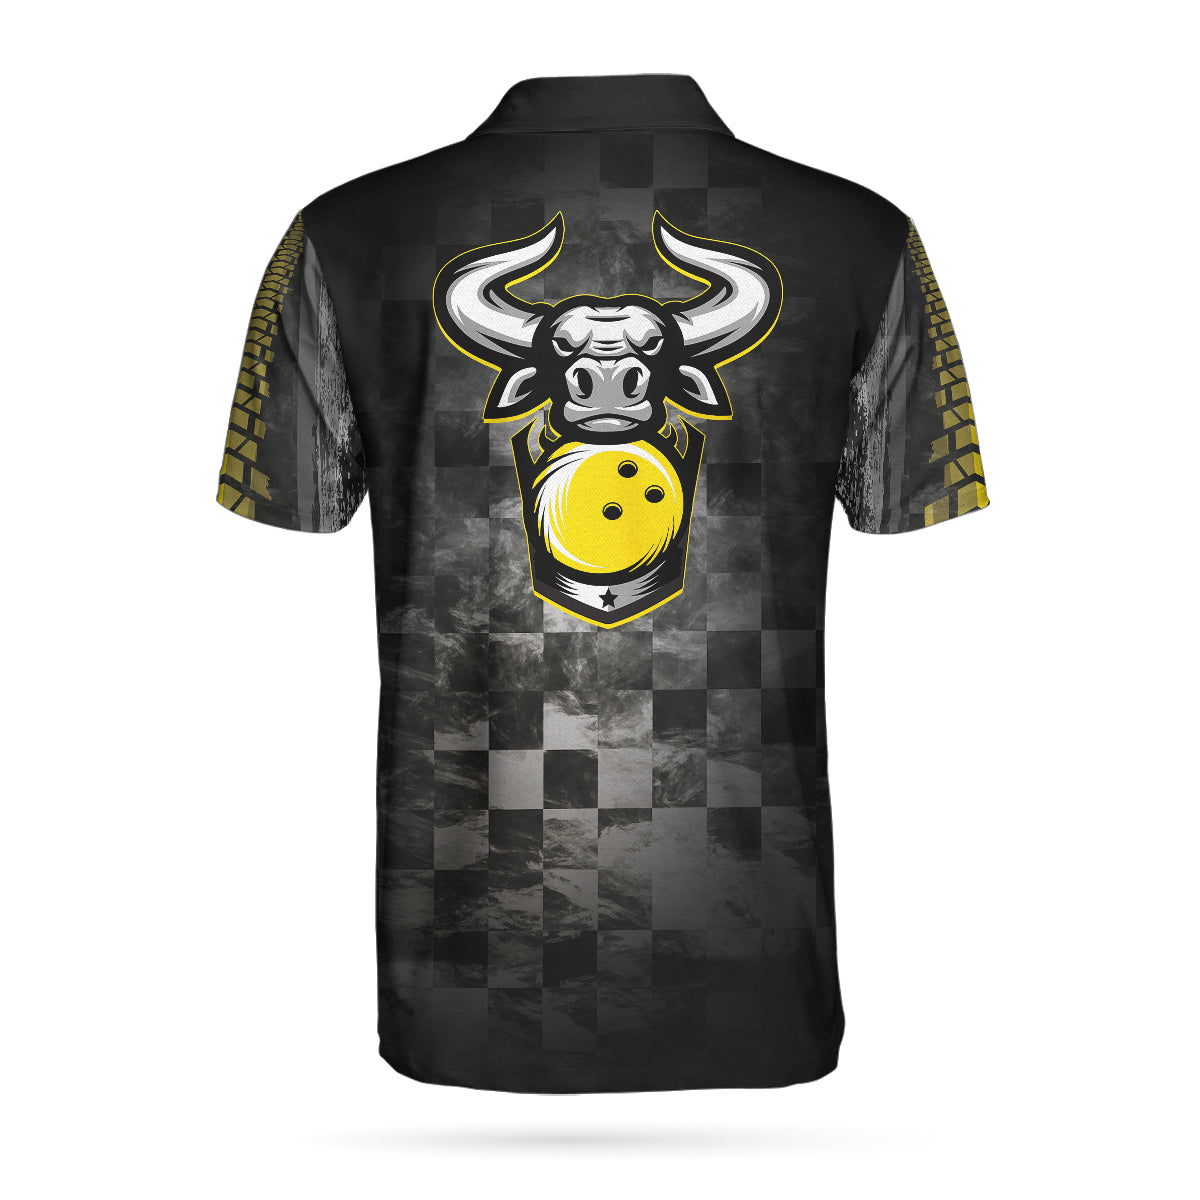 Bowling Bull Black And Yellow Short Sleeve Polo Shirt For Bowling/ Bull Polo Shirt/ Best Bowling Shirt For Men Coolspod